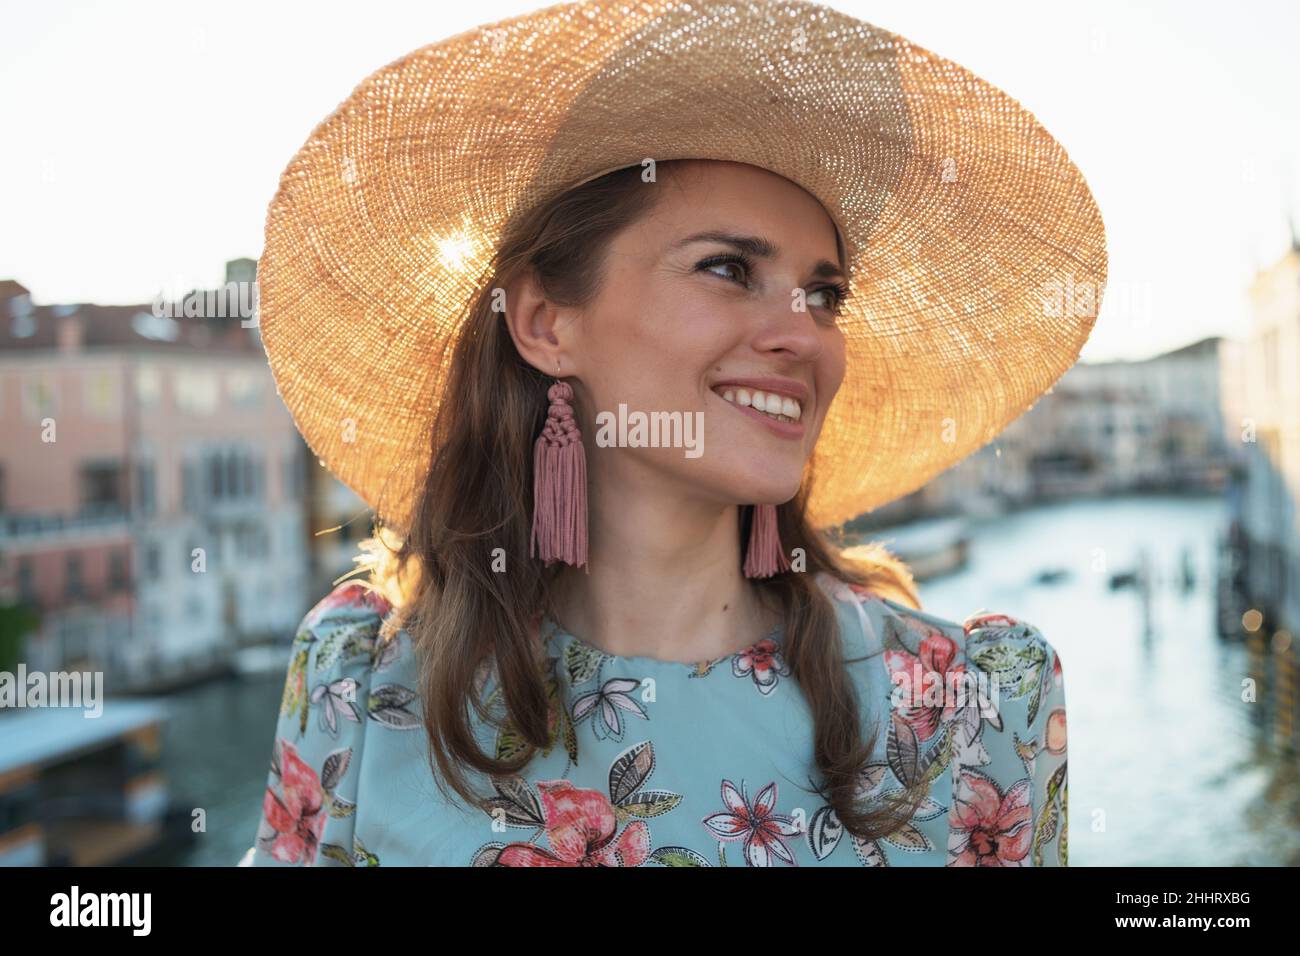 happy young solo tourist woman in floral dress with hat sightseeing on Accademia bridge in Venice, Italy. Stock Photo